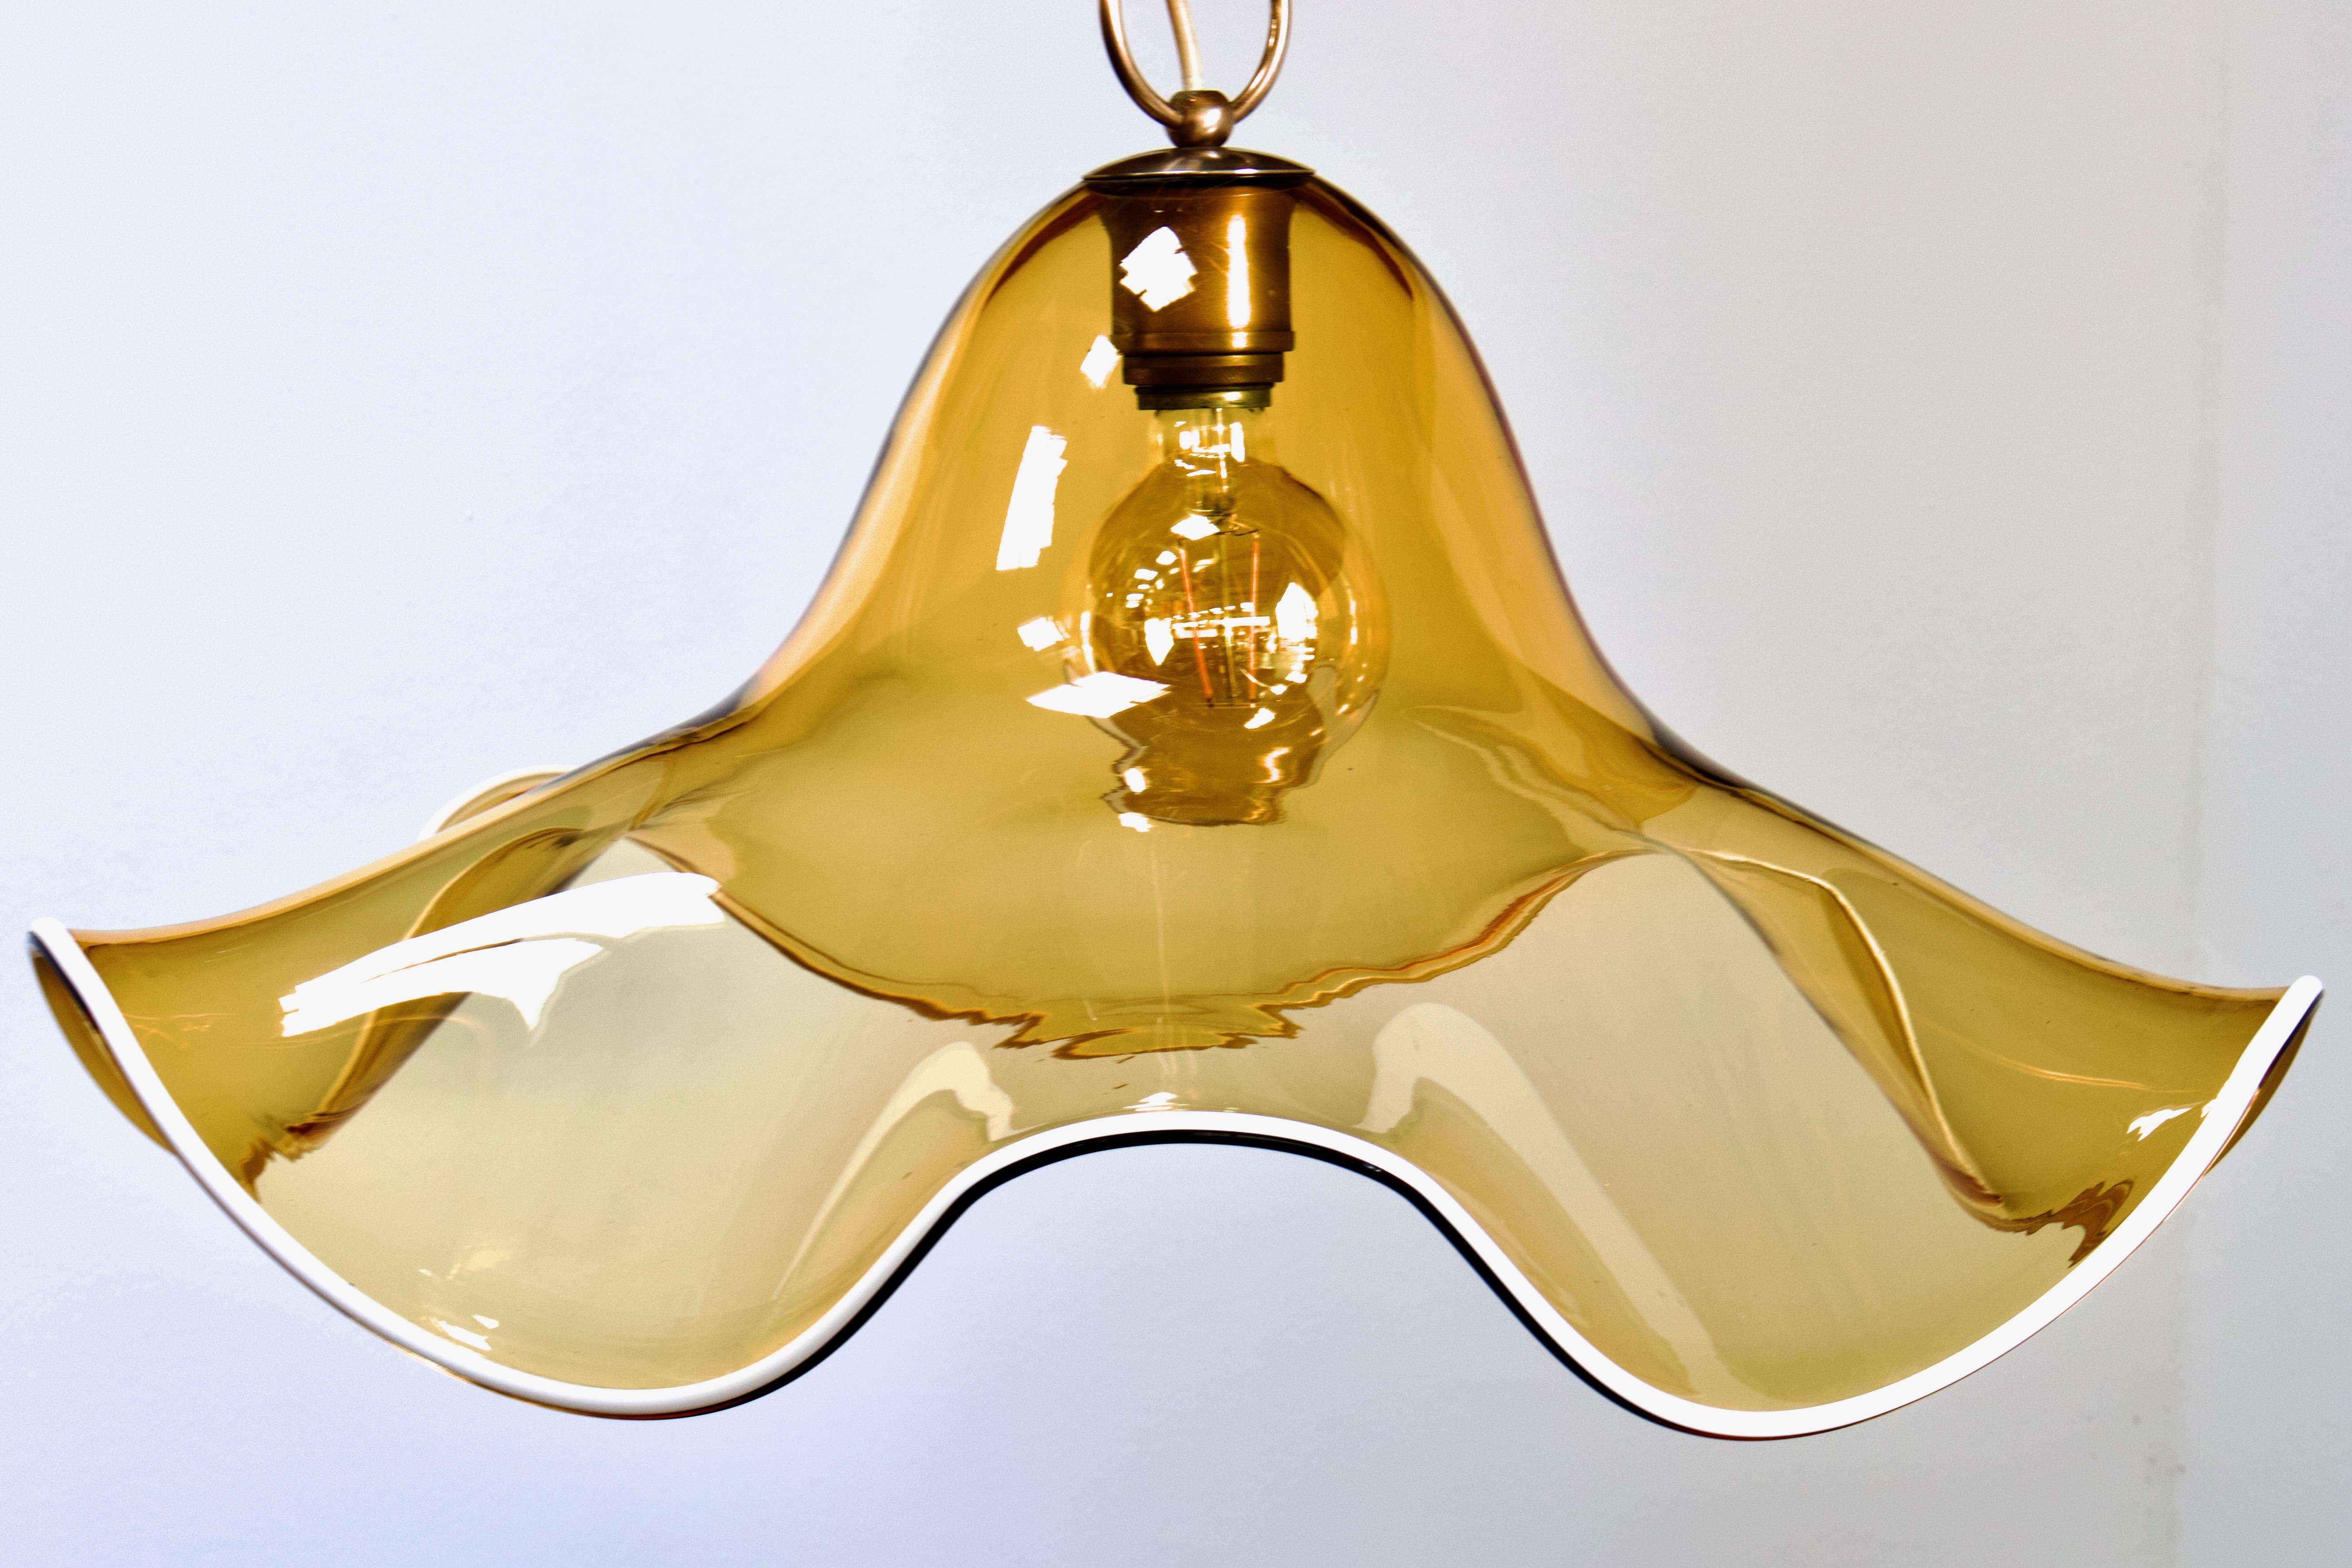 Italian XL Floral Amber Murano Glass Pendant Lamp by La Murrina, 1970s Italy For Sale